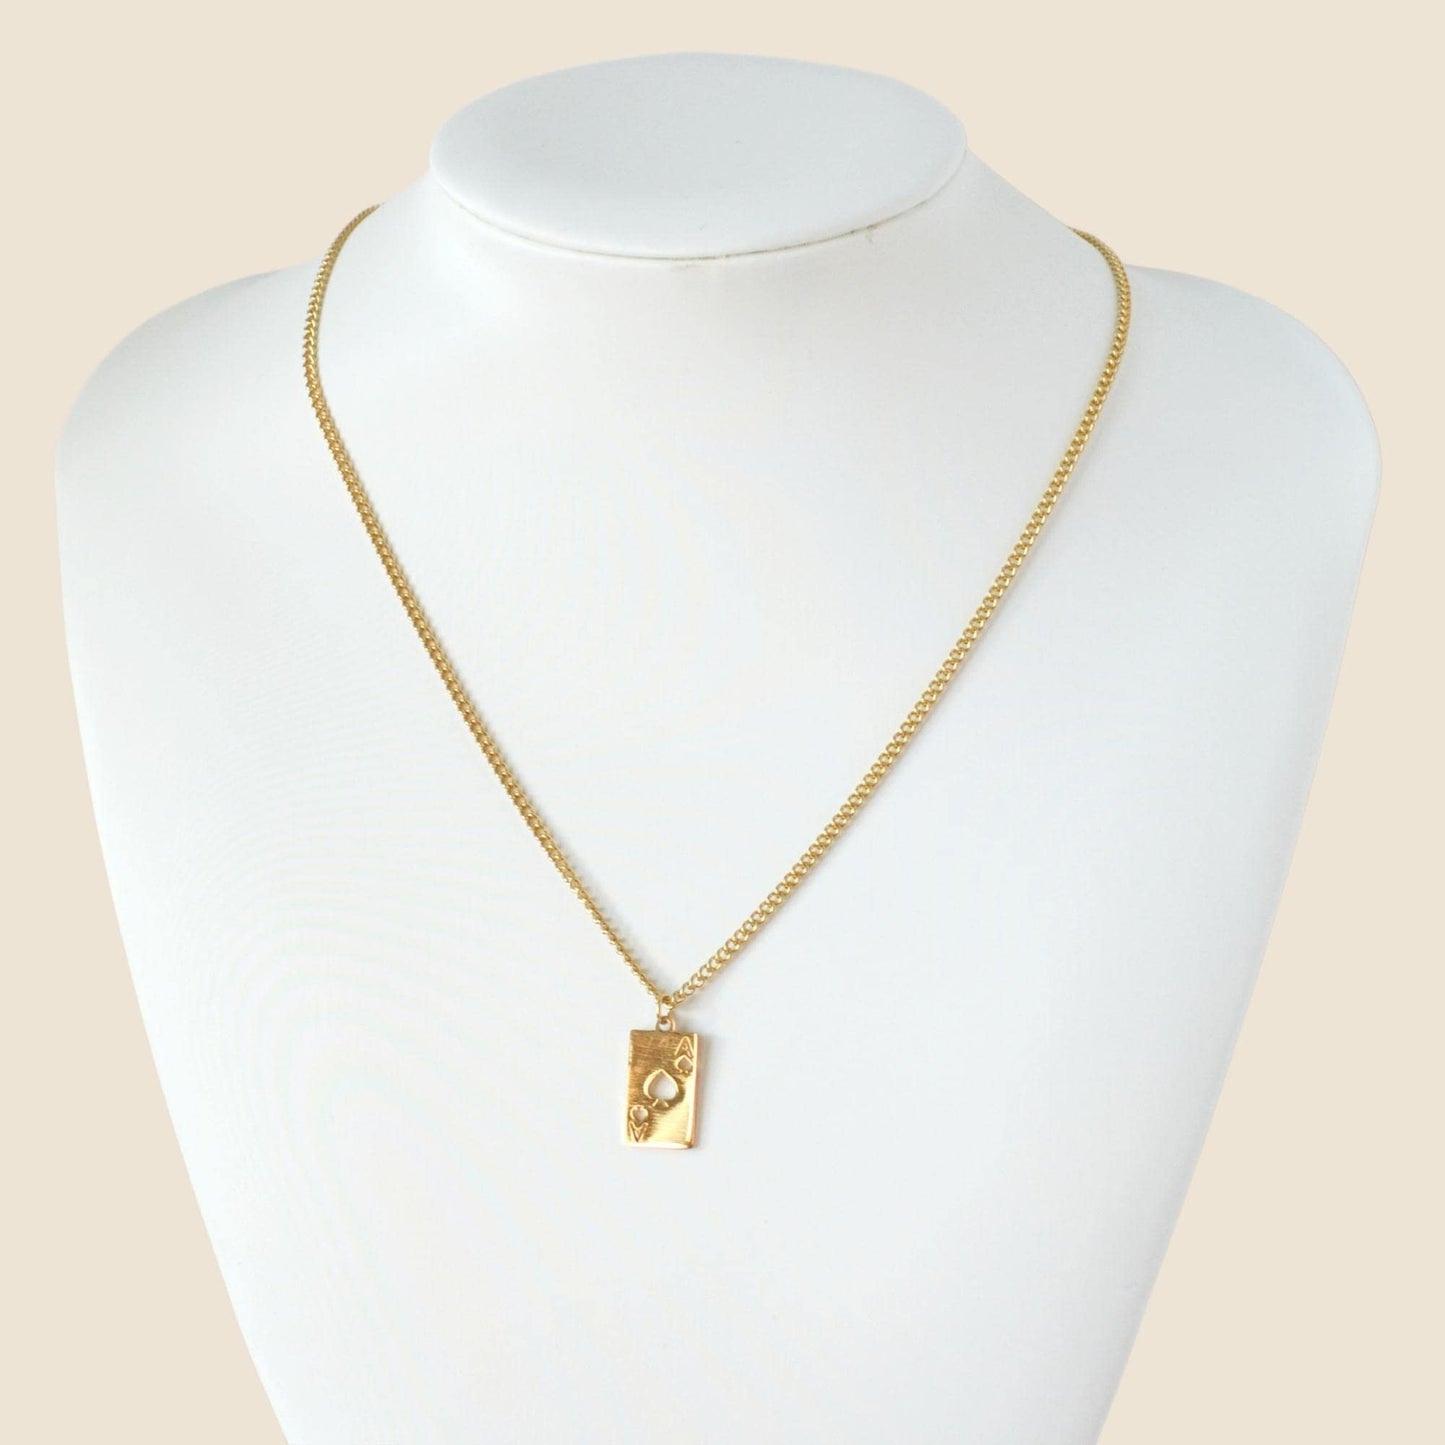 Gold Ace of Spade Playing Card Pendant Necklace Curb Chain For Men or Women - Necklace - Boutique Wear RENN